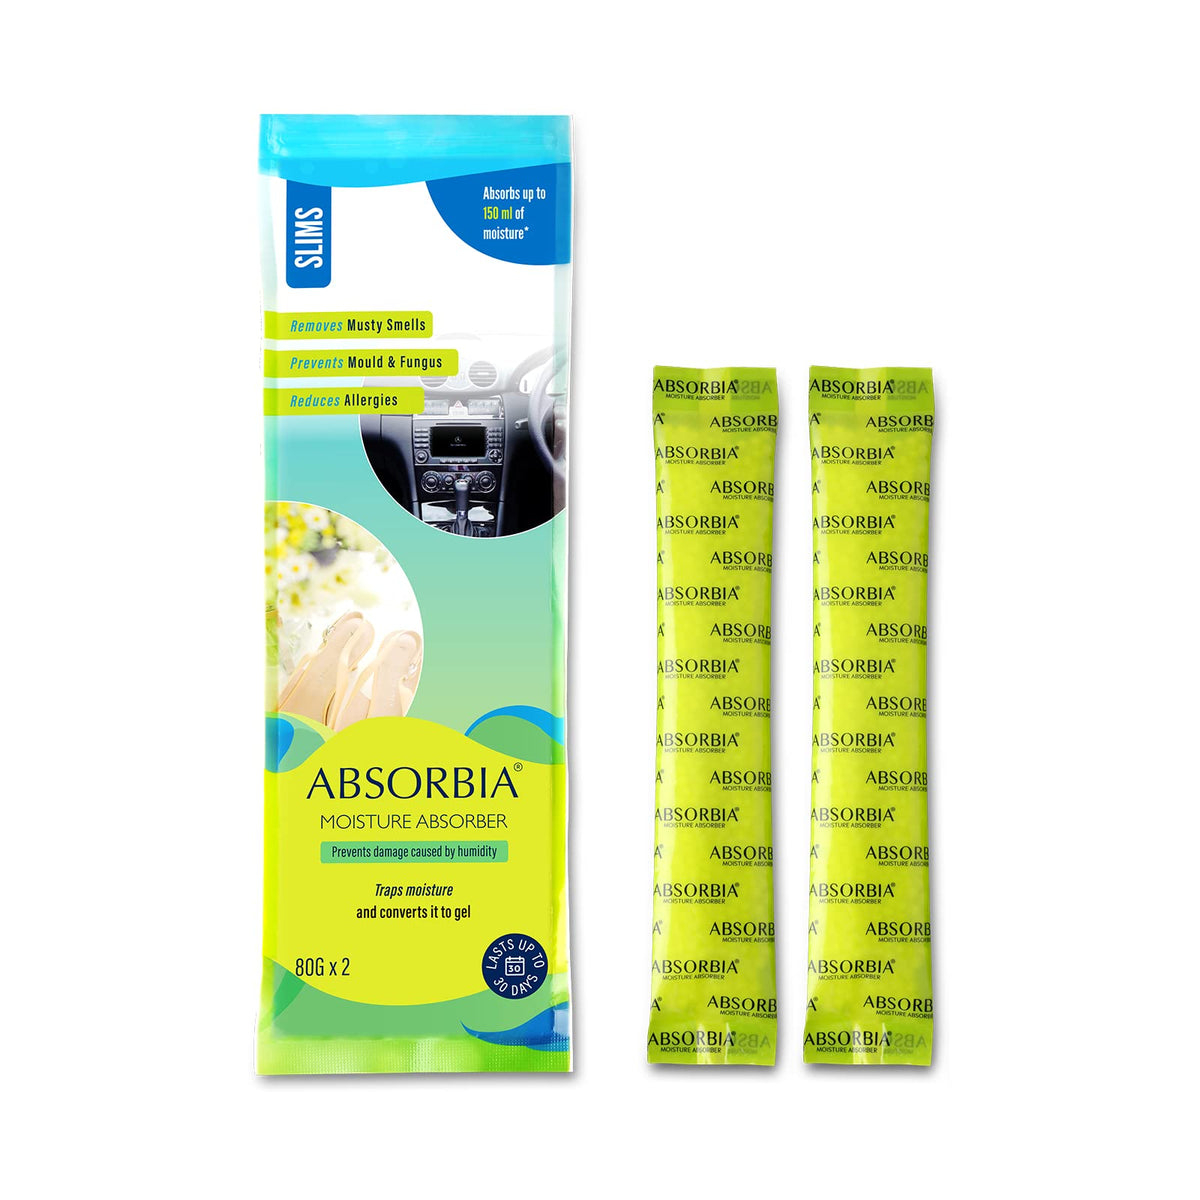 Absorbia Moisture Absorber Sachet -Pack of 6 (200ml Each) | Dehumidifier for Bags, Suitcases & Absorbia Odour Neutralizer & Air Freshener Fabric + spaces Refresher, for cars and living spaces (500 ML)